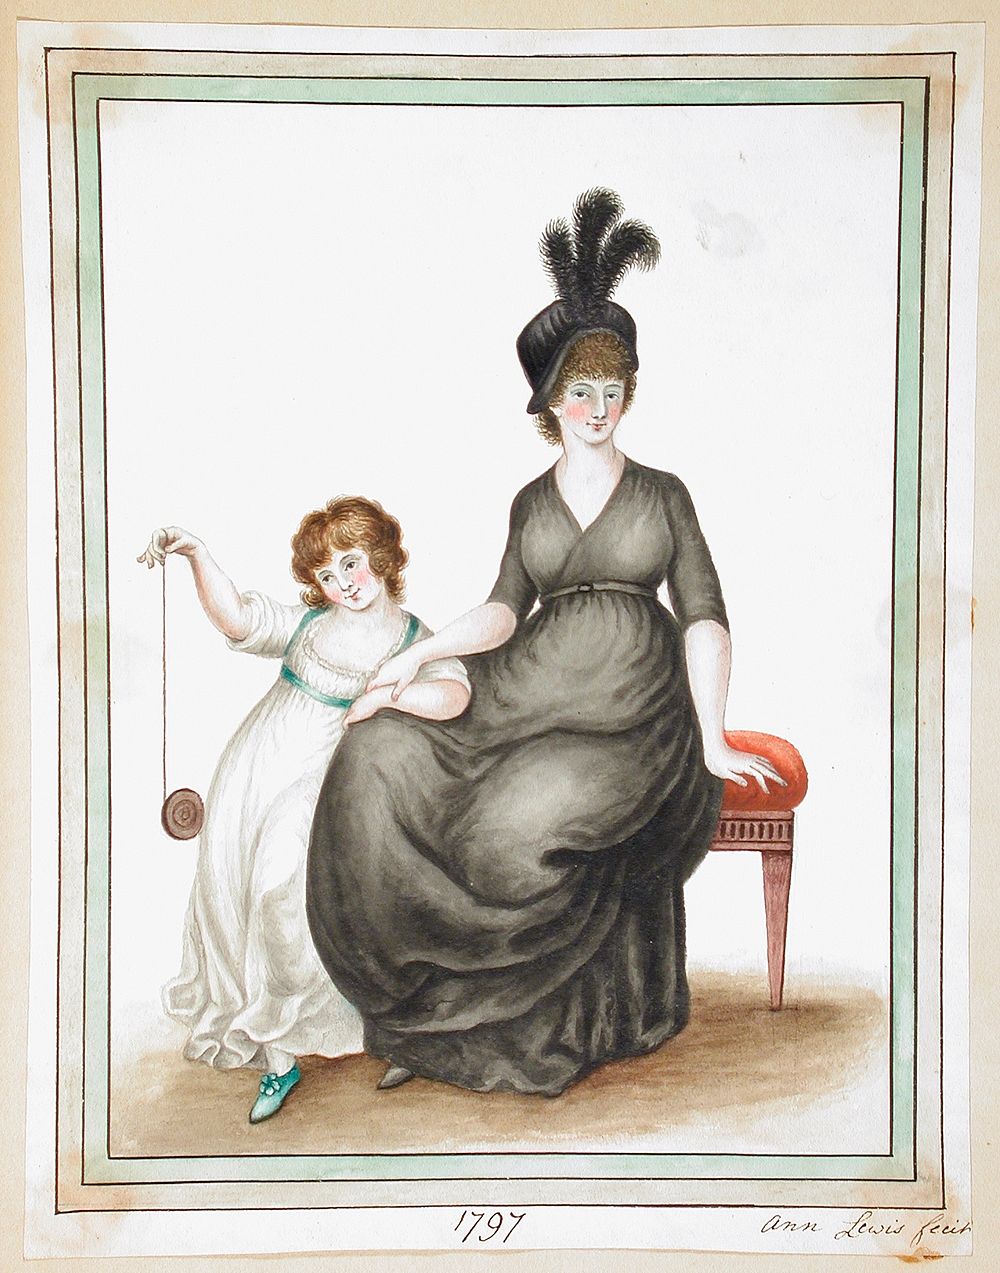 Collection of English Original Watercolour Drawings:  1797 by Ann Frankland Lewis